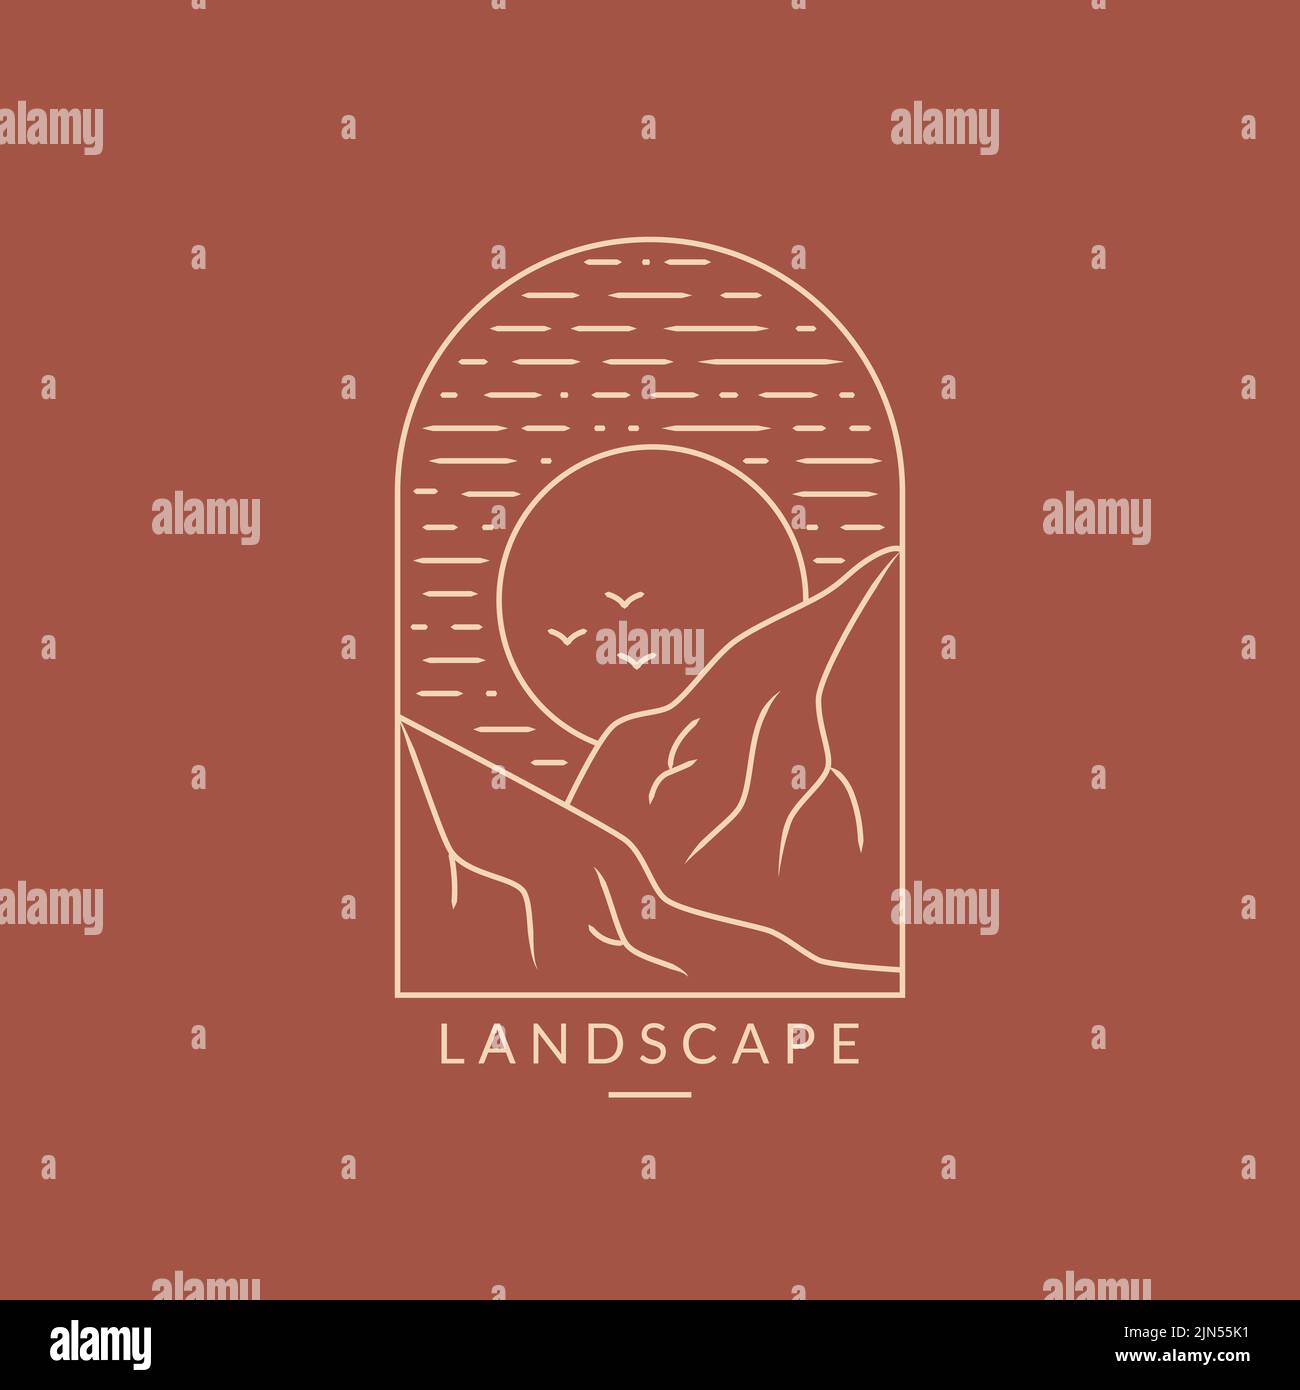 Landscape logo. Line emblem with mountains and sun. Trendy design for travel agencies, eco tourism, outdoor resort, mountaineering or other themes. Stock Vector